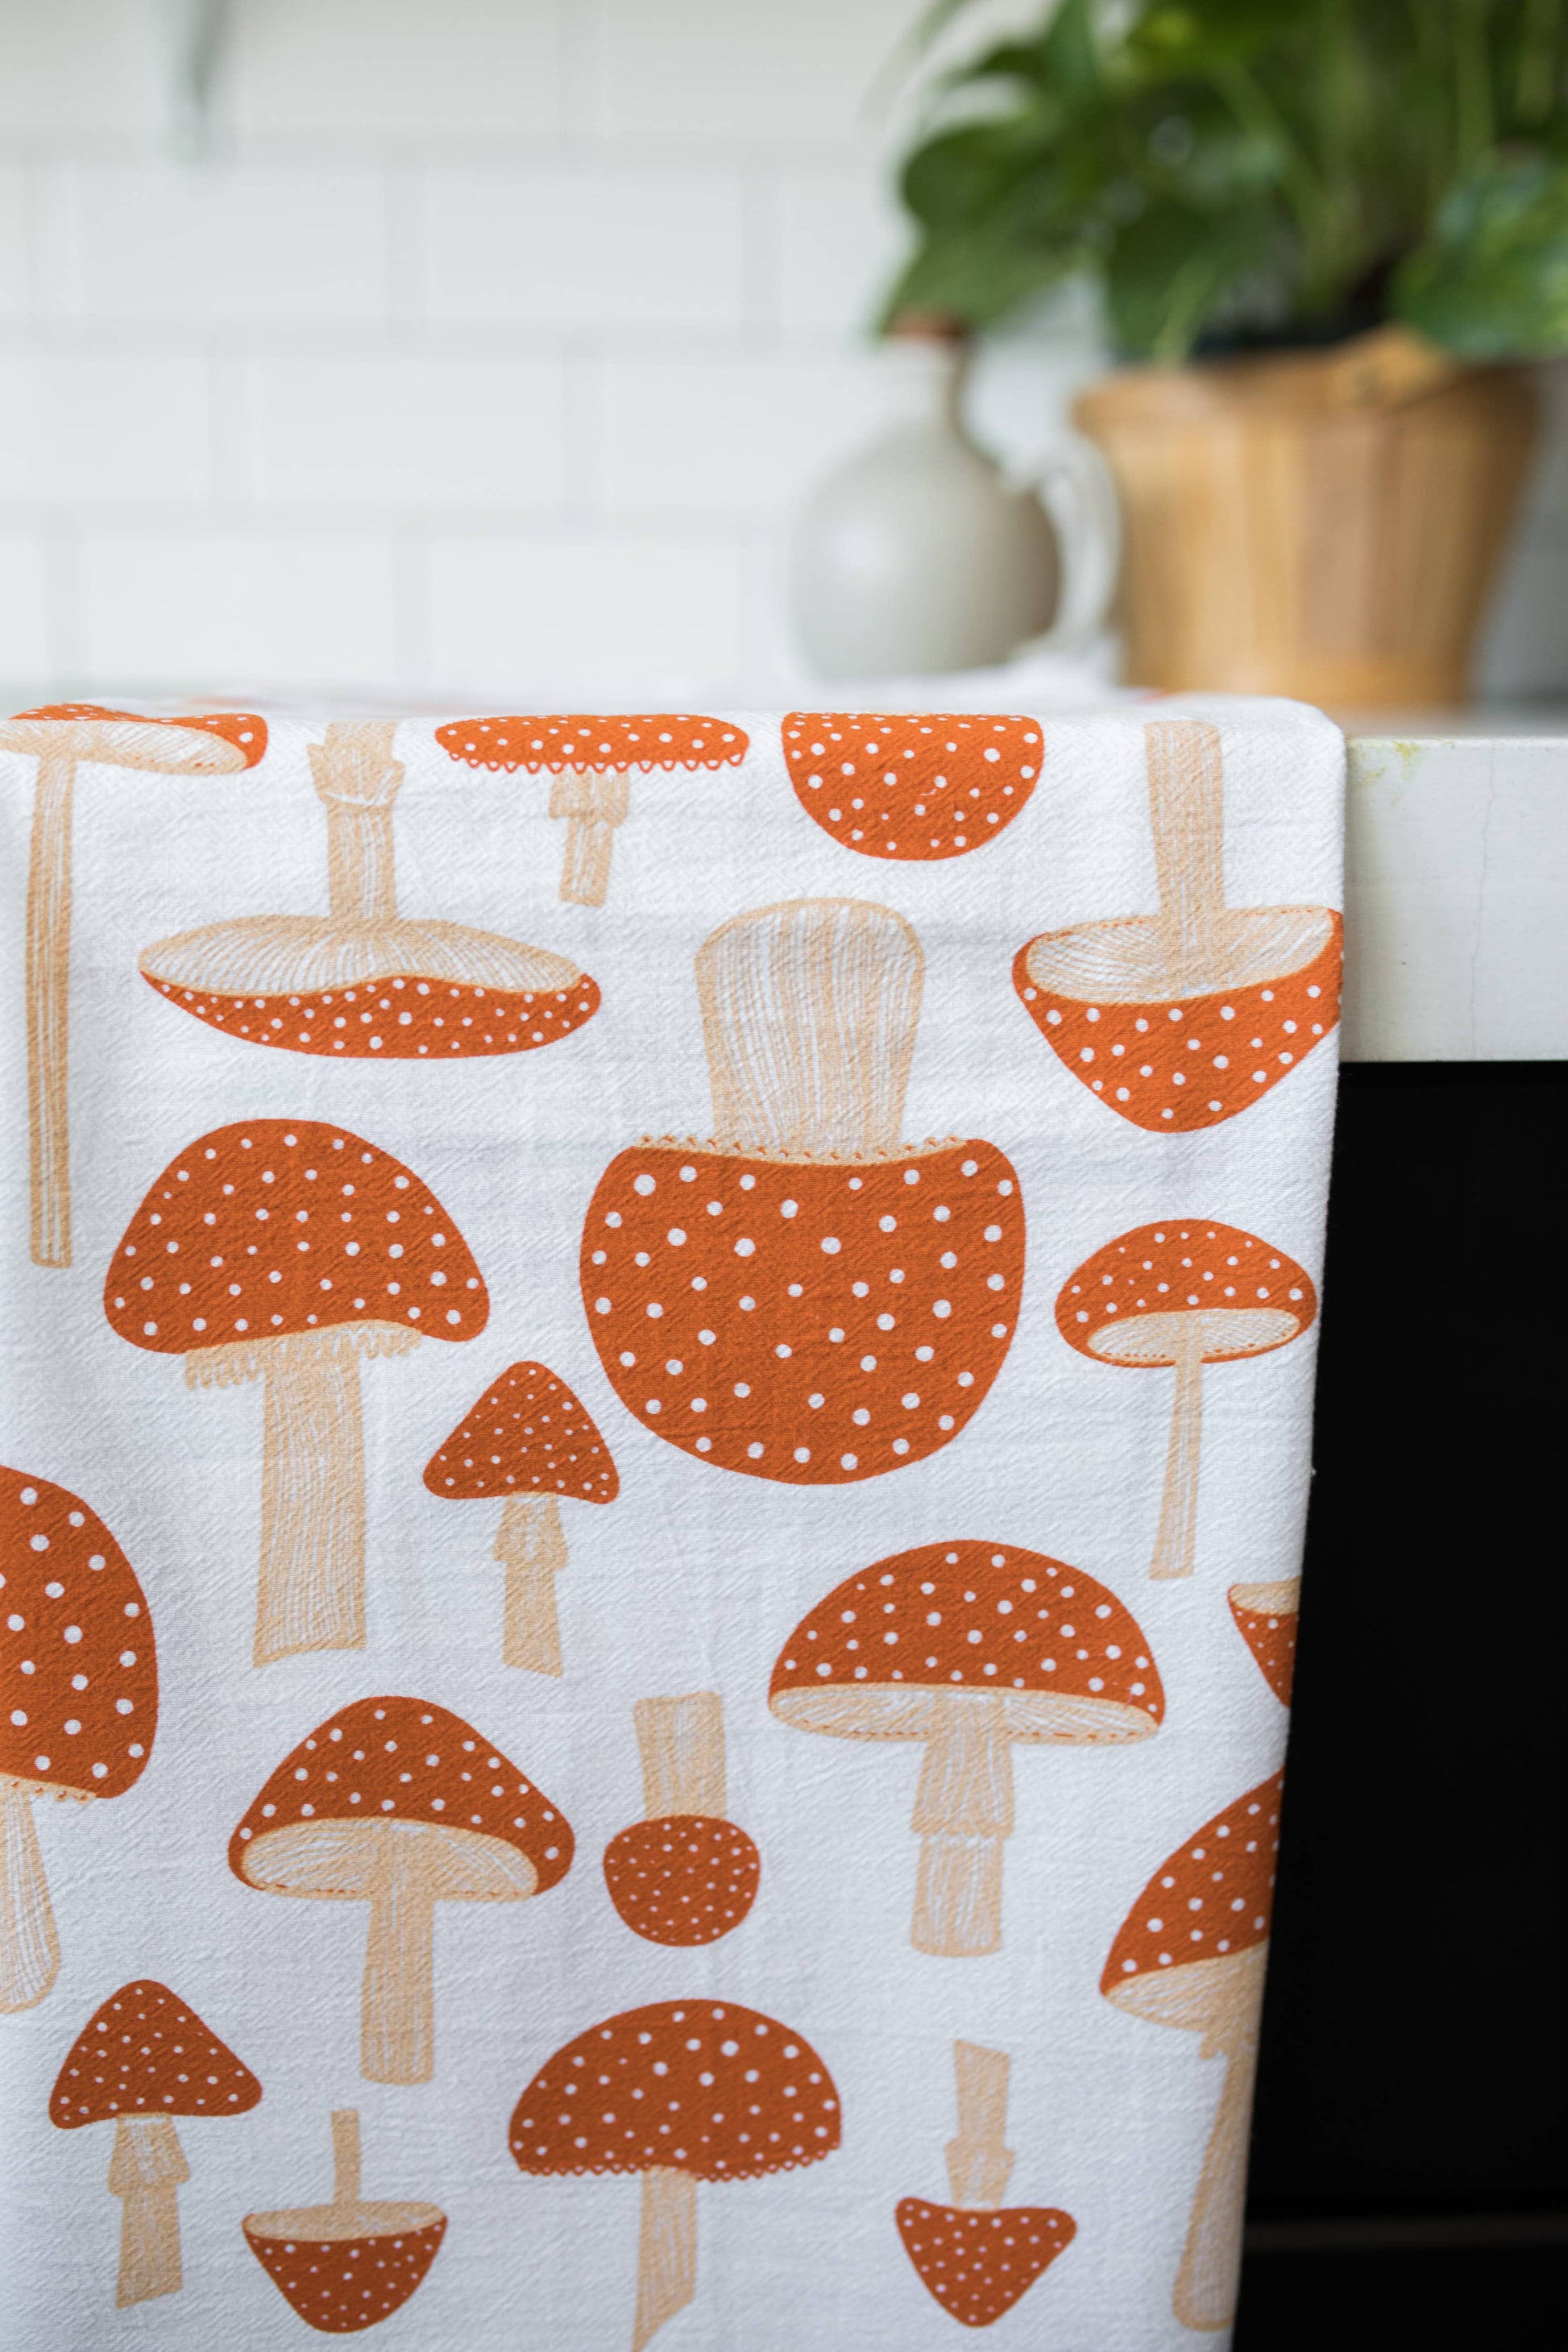 Tea towel with red capped mushrooms on it 